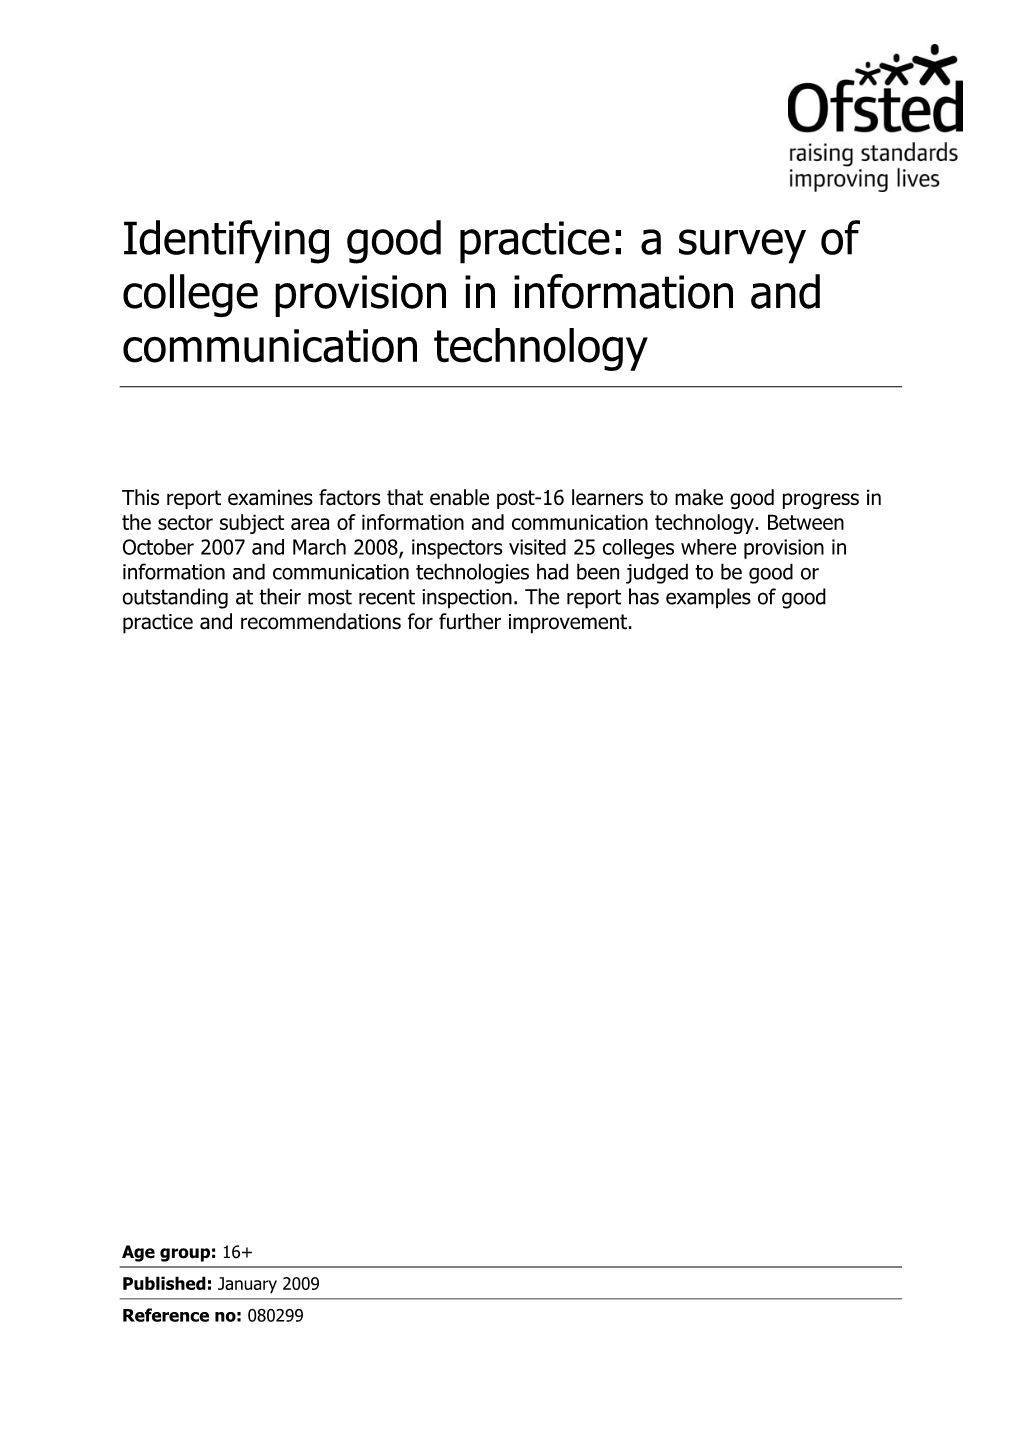 A Survey of College Provision in Information and Communication Technology